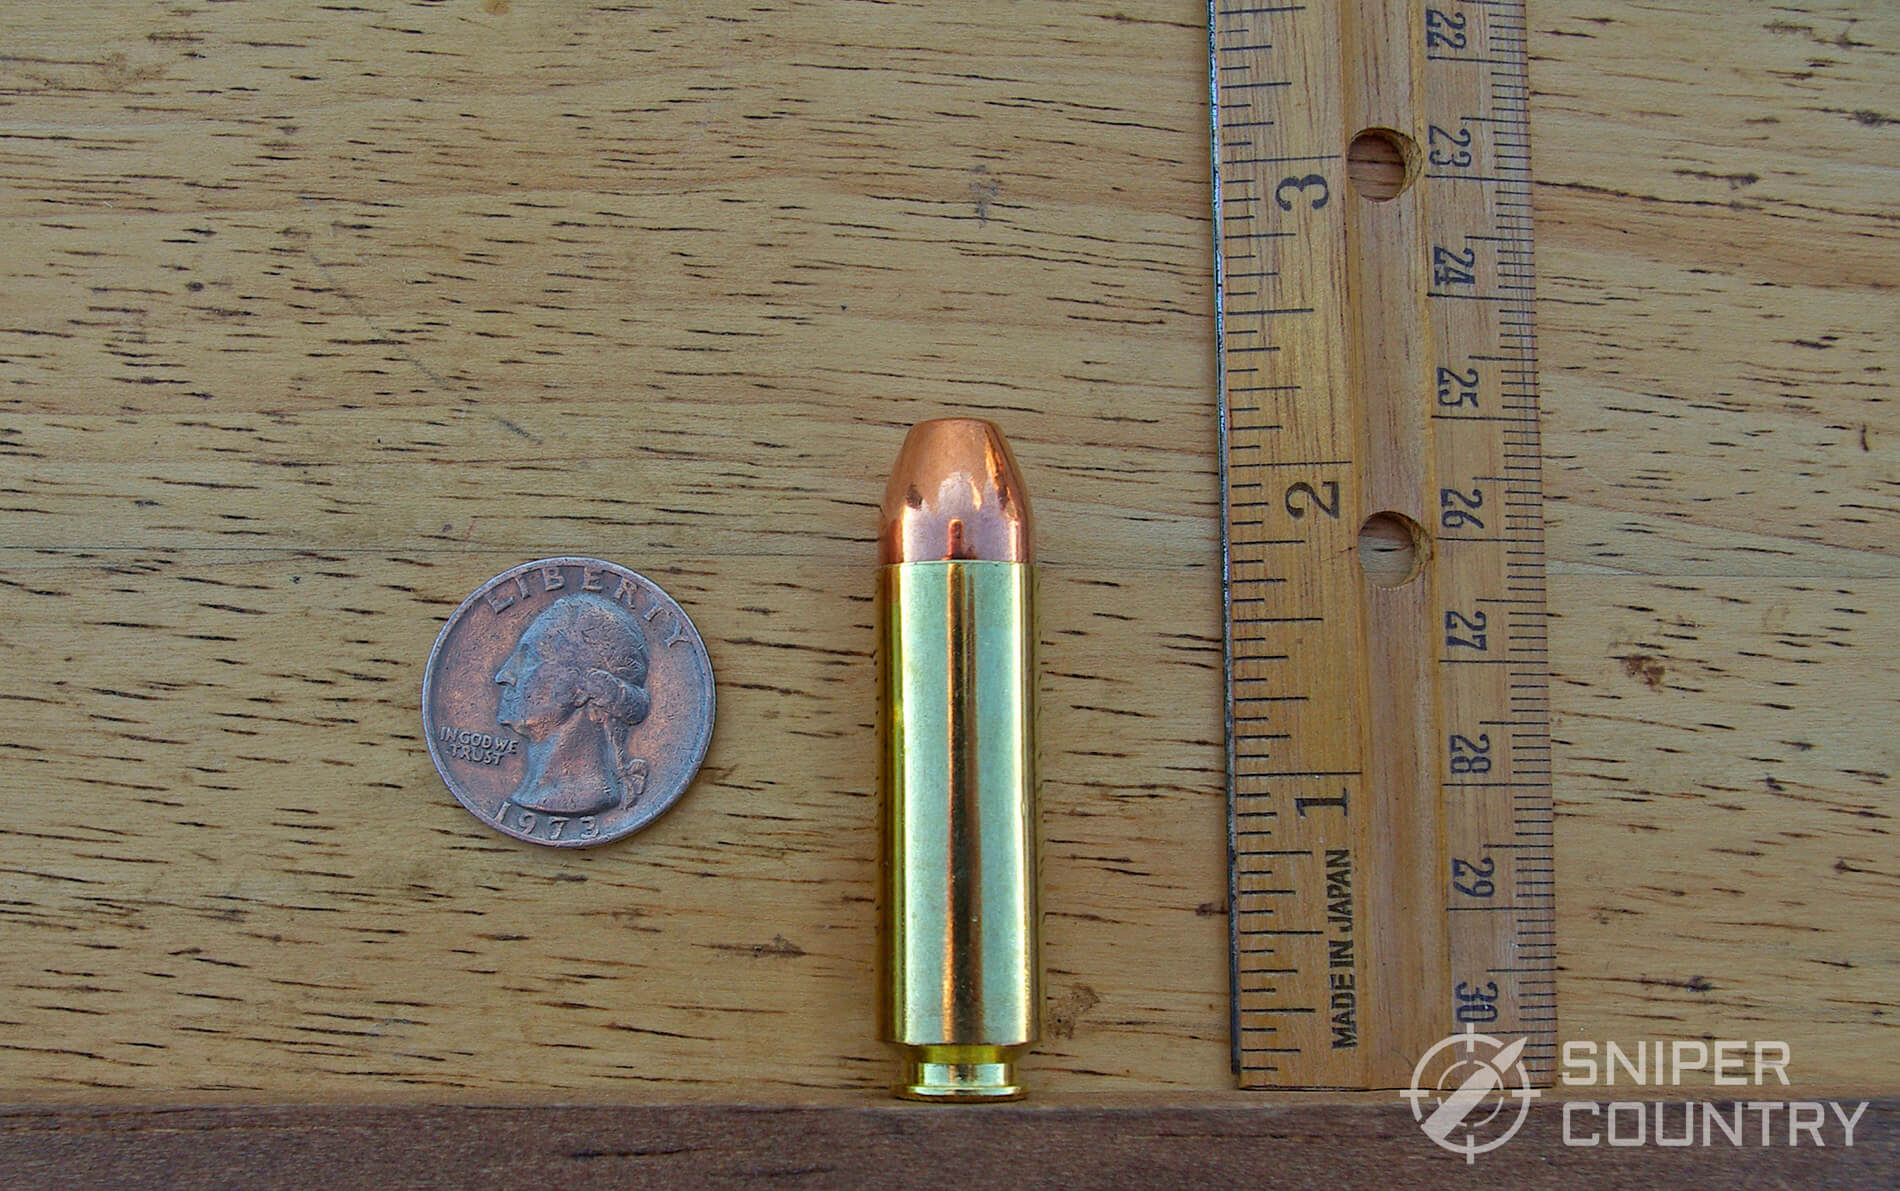 Rifle Caliber Chart Smallest To Largest